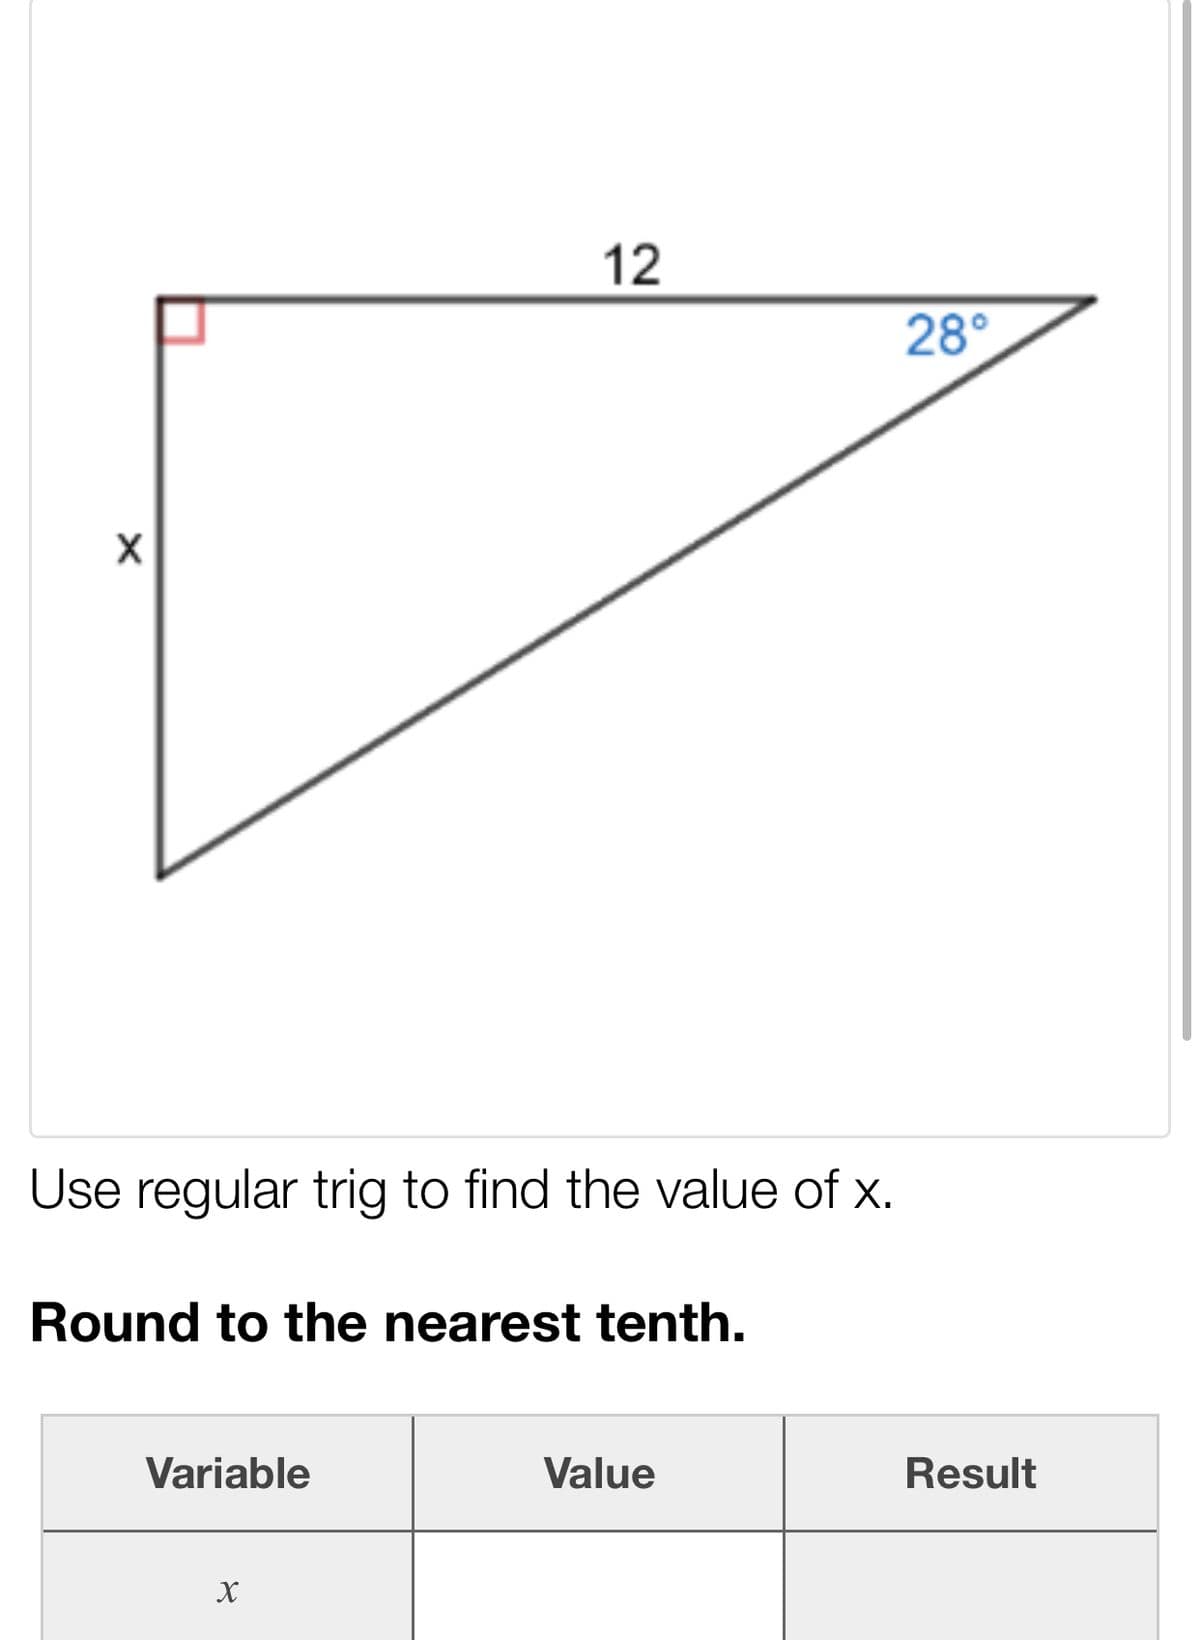 12
28°
Use regular trig to find the value of x.
Round to the nearest tenth.
Variable
Value
Result
